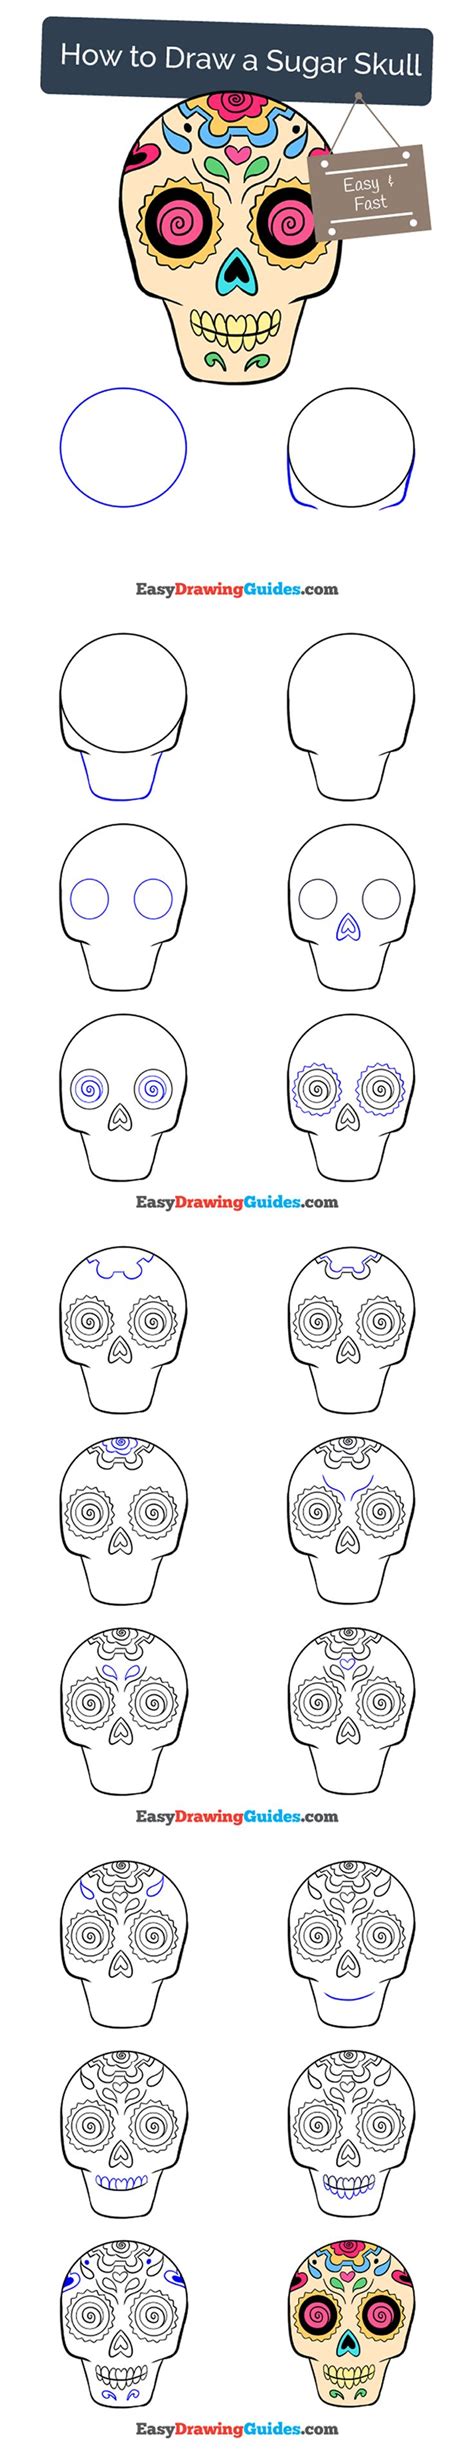 How To Draw A Sugar Skull Easy Drawing Guides Drawing Tutorials For